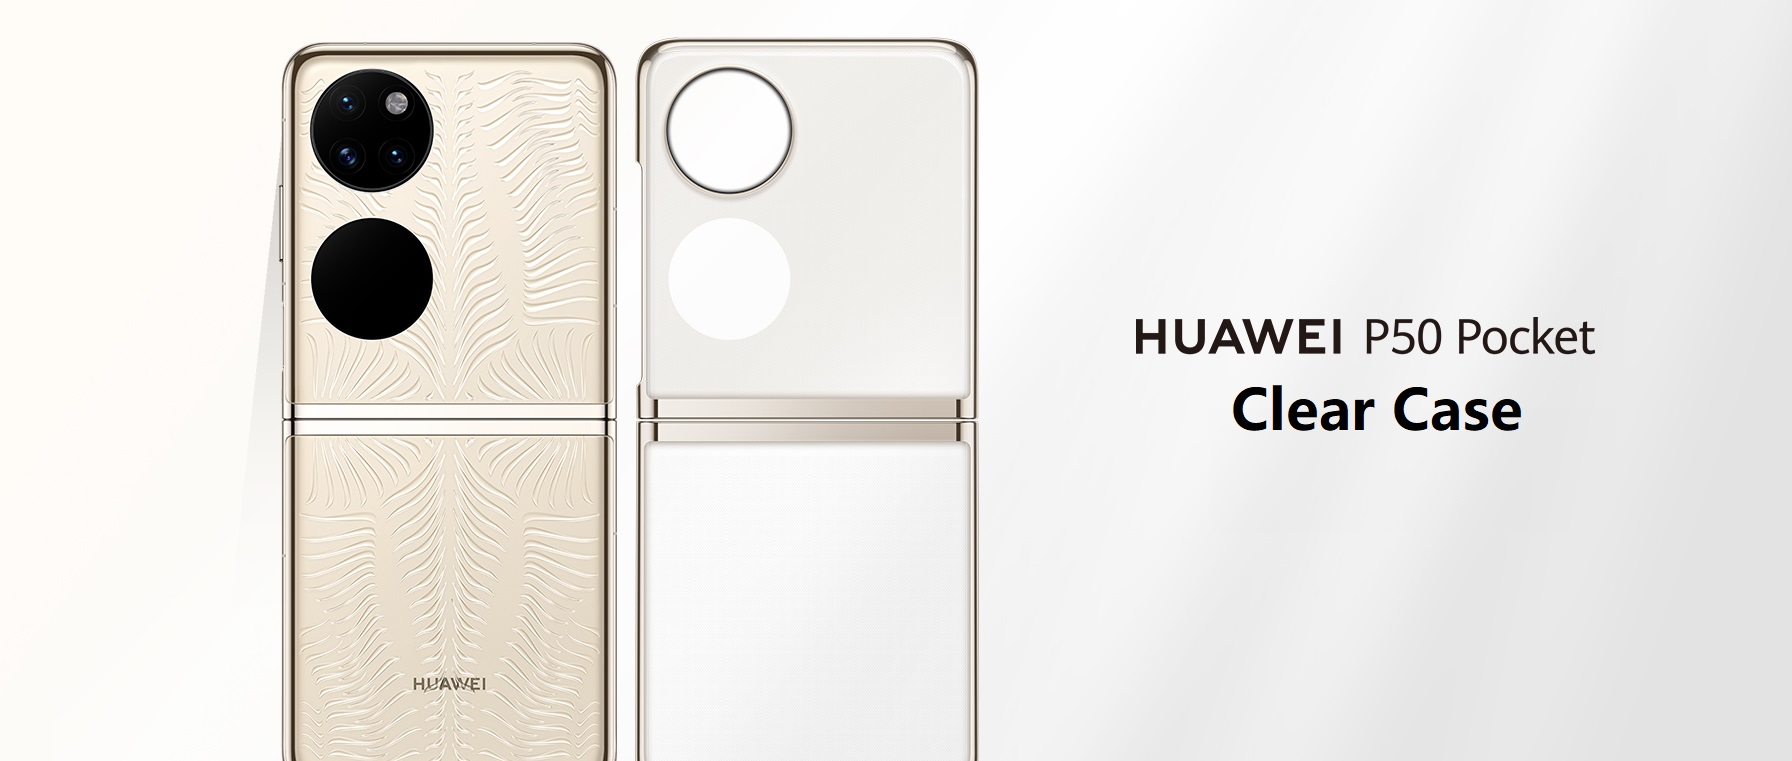 Huawei P50 Pocket Clear Case